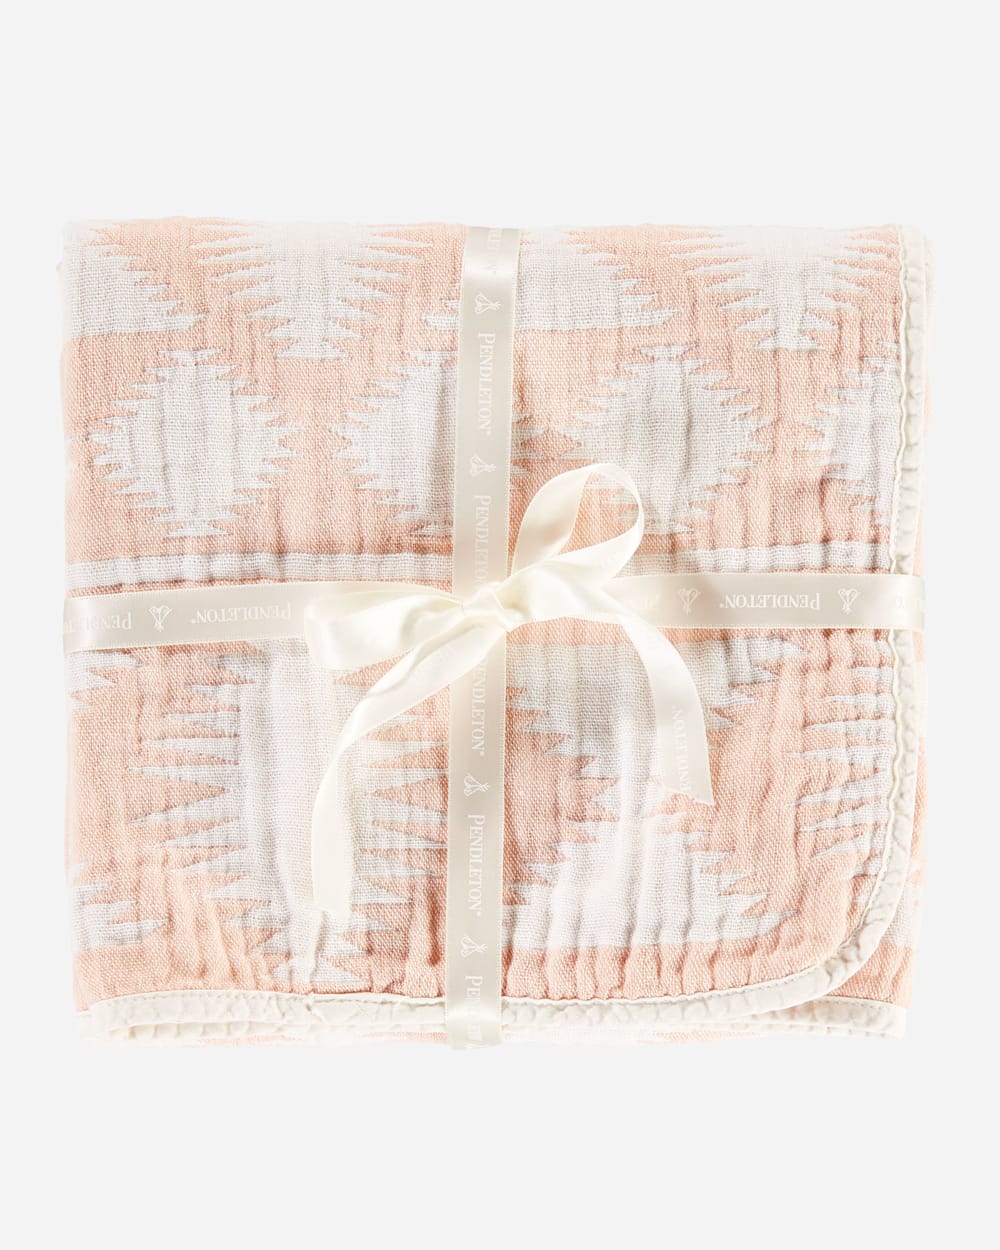 ALTERNATE VIEW OF FALCON COVE COTTON BABY BLANKET IN CORAL image number 2